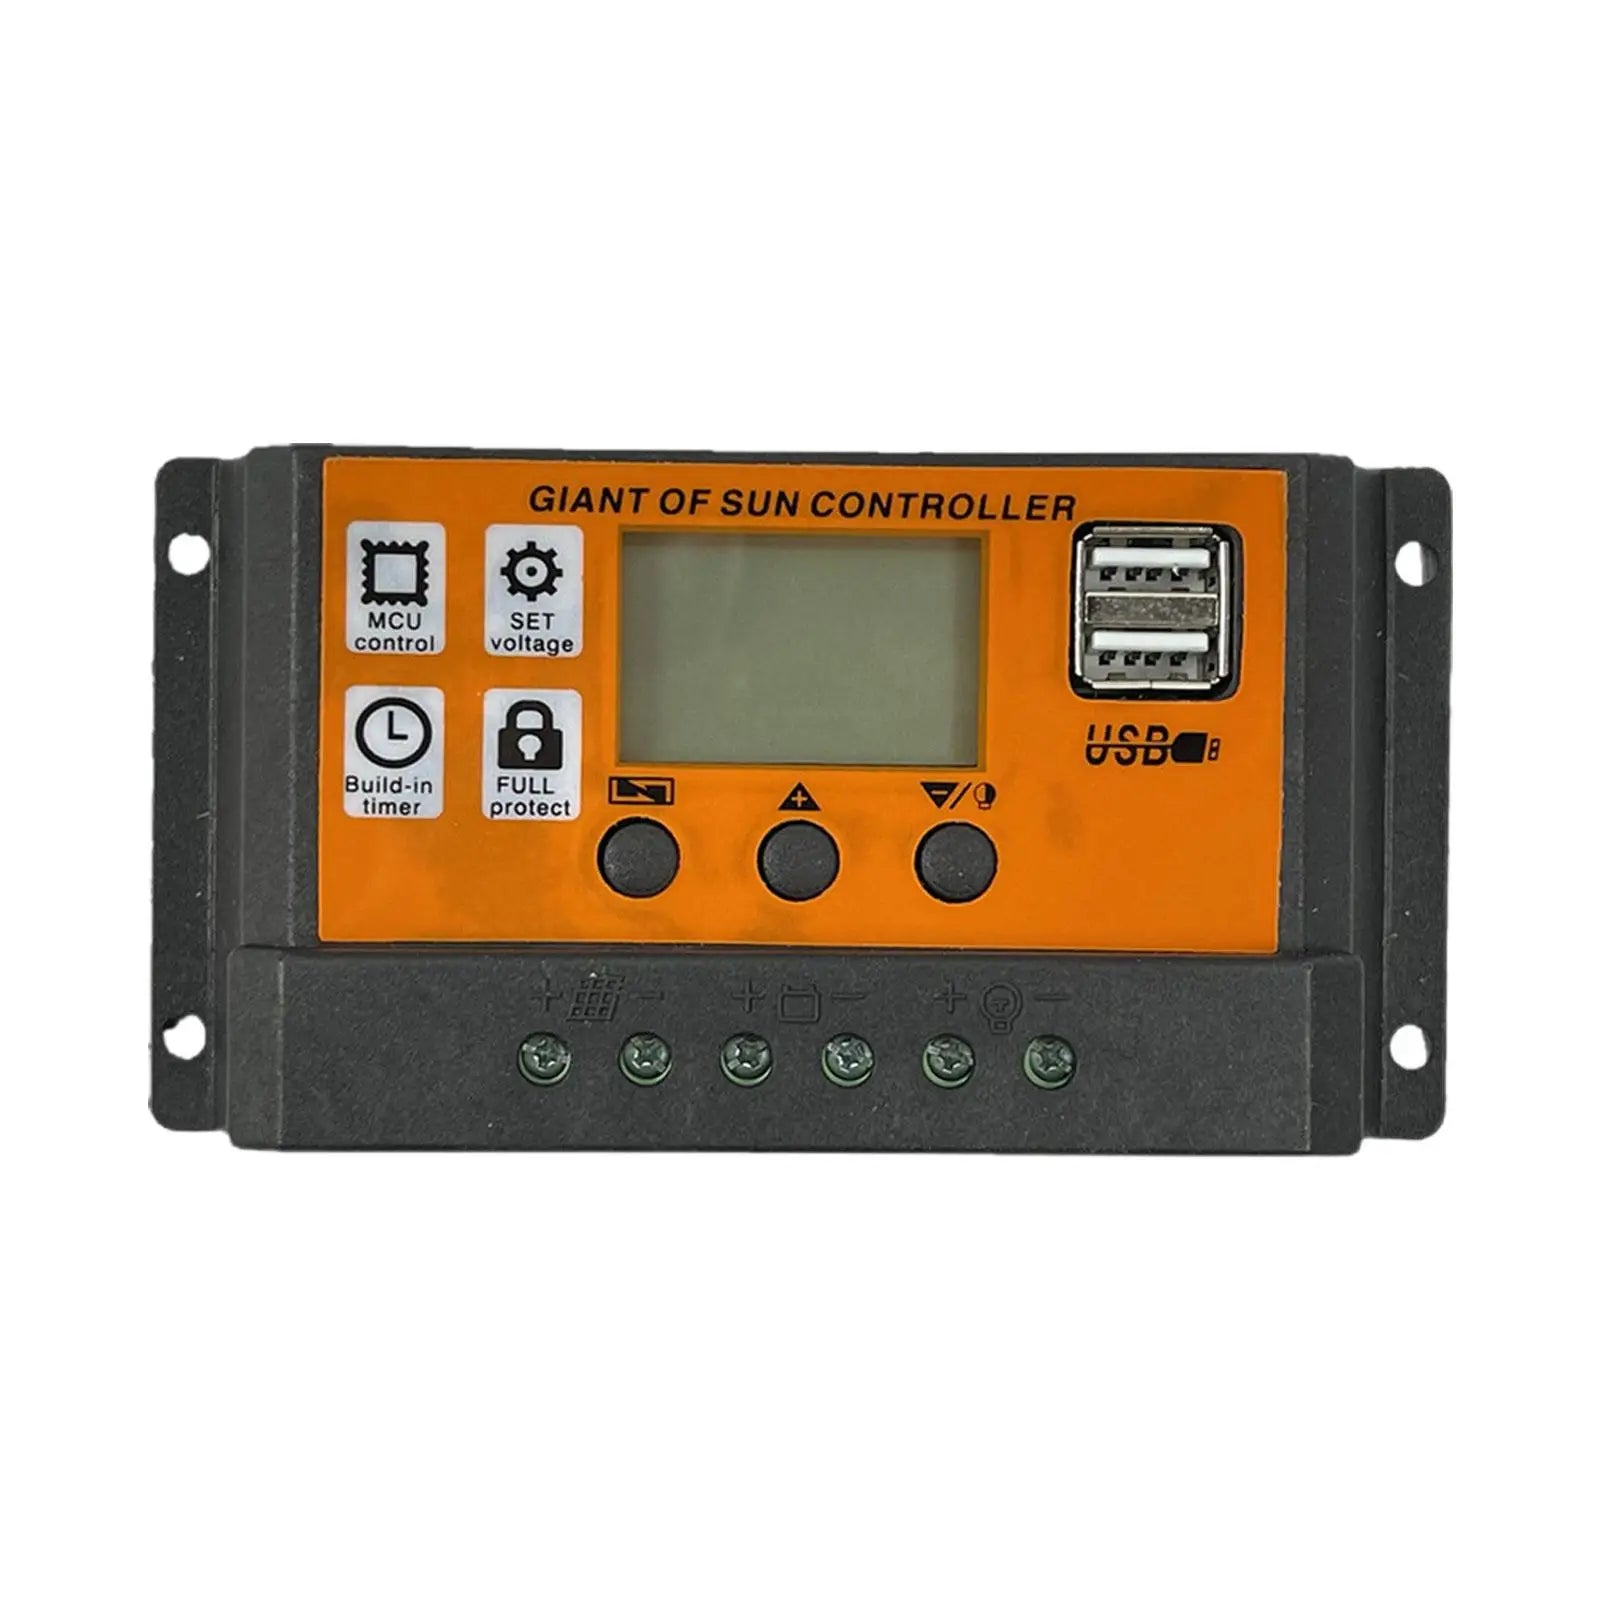 MPPT Solar Charge Controller, Advanced solar charger controller with timer and protections, controlled by microcontroller and equipped with USB connection.